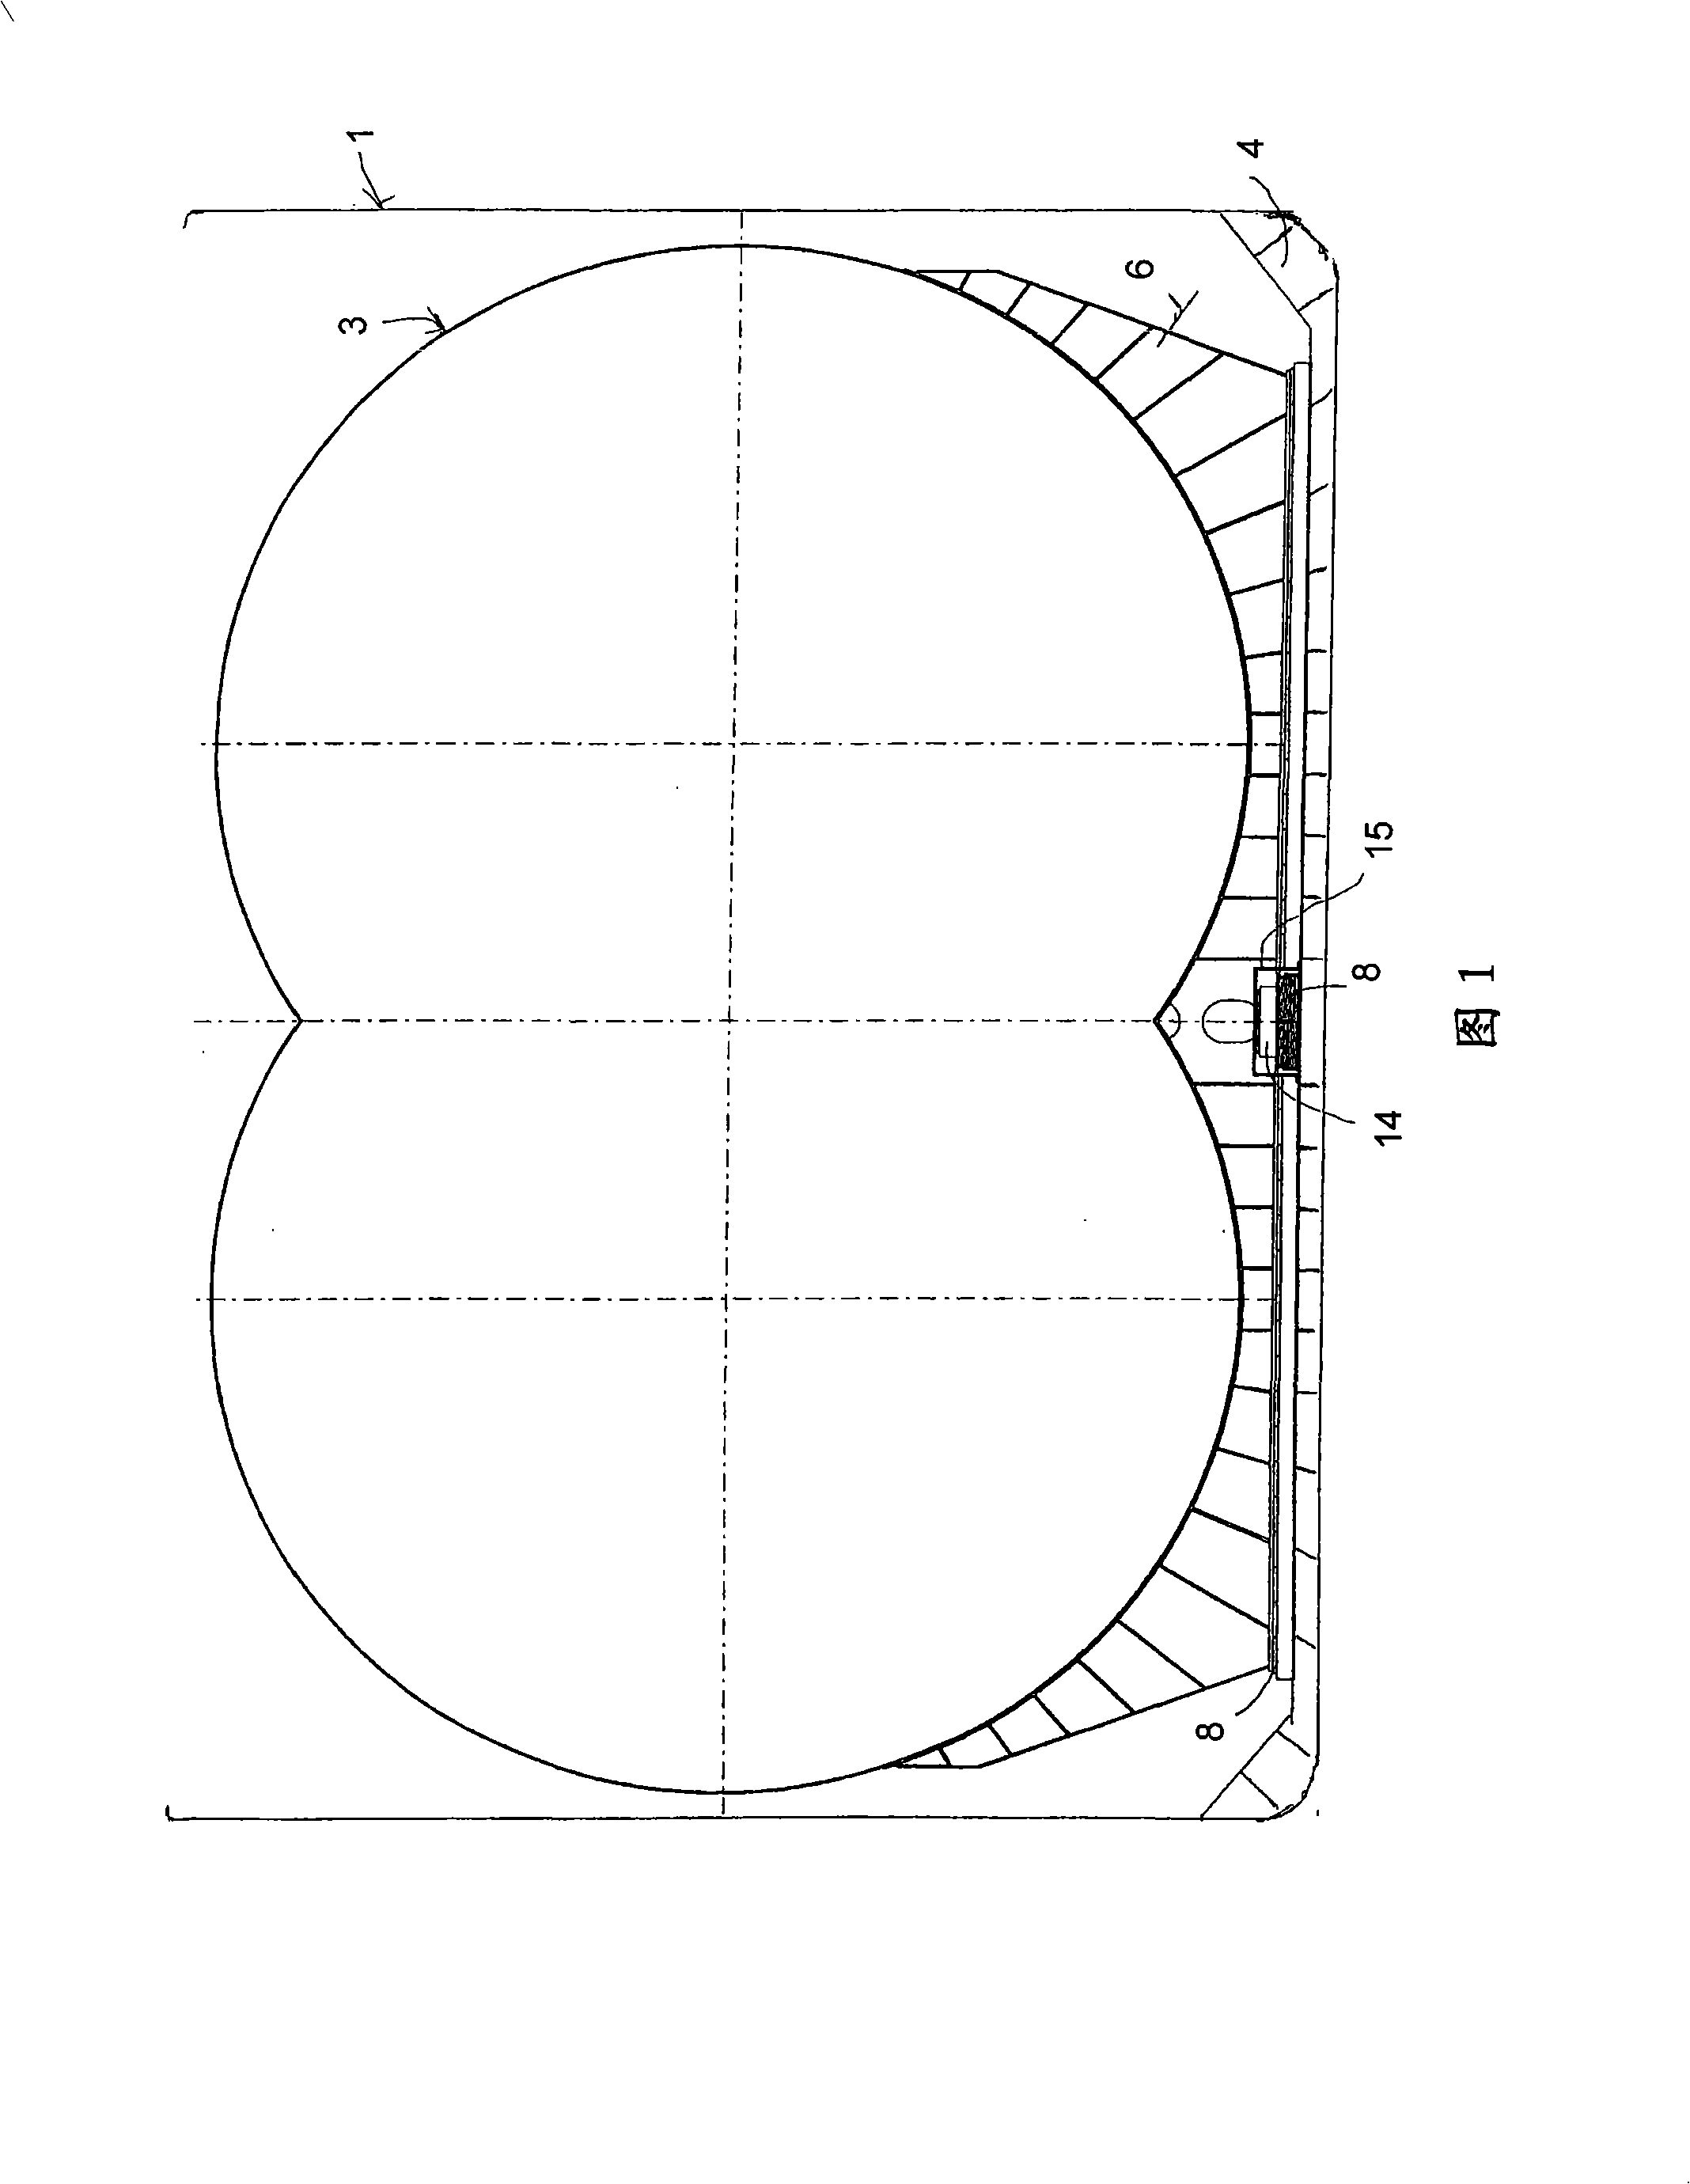 Device for mounting a tank in a ship